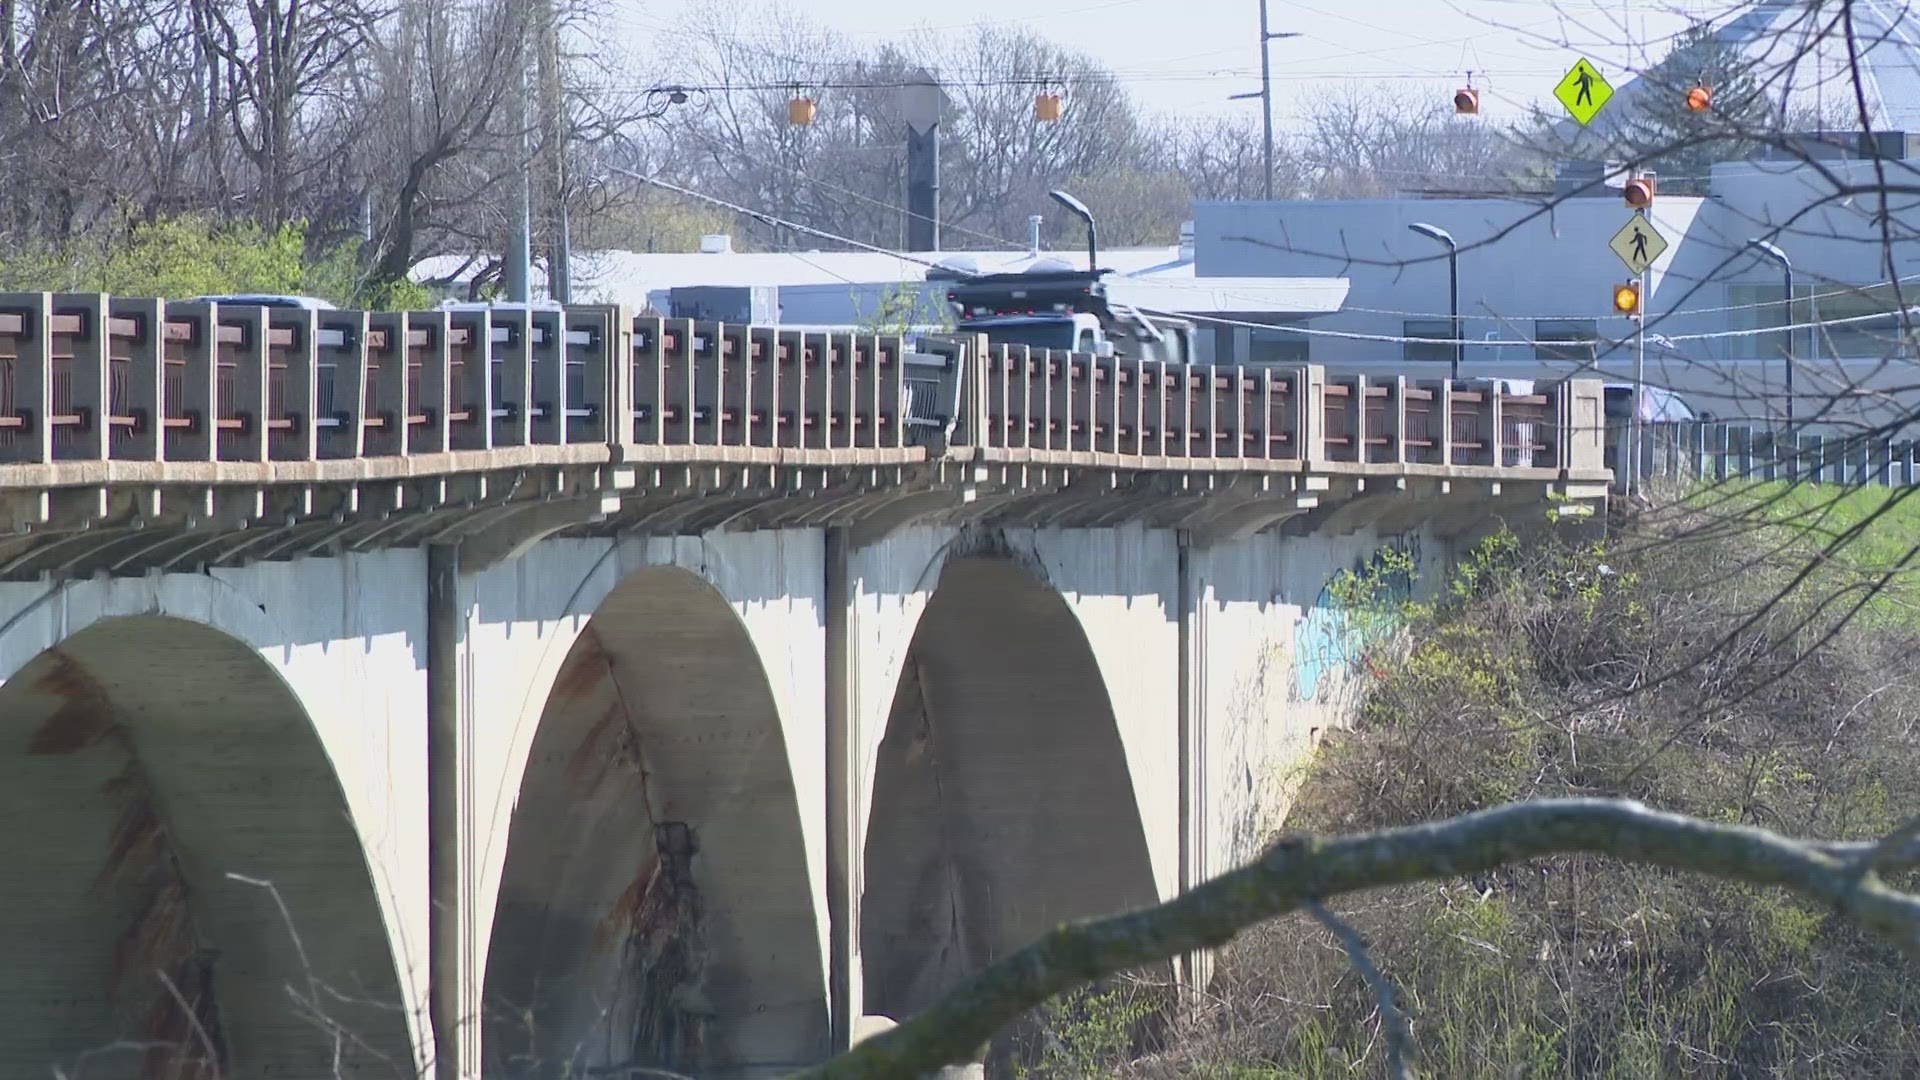 13News reporter Gina Glaros breaks down the timeline for when the 16th Street bridge over the White River will be completed.